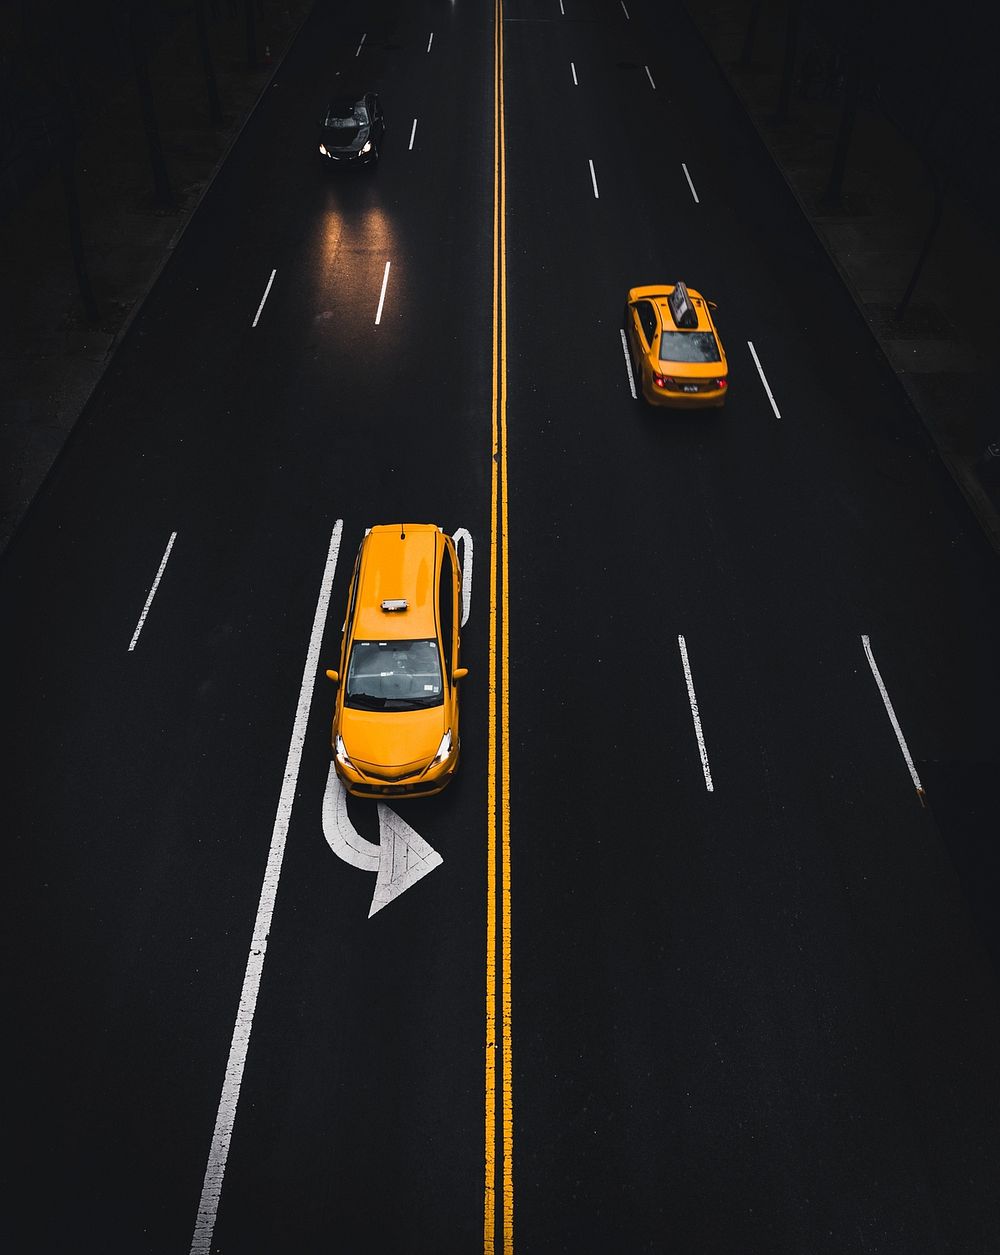 Yellow cabs in New York City